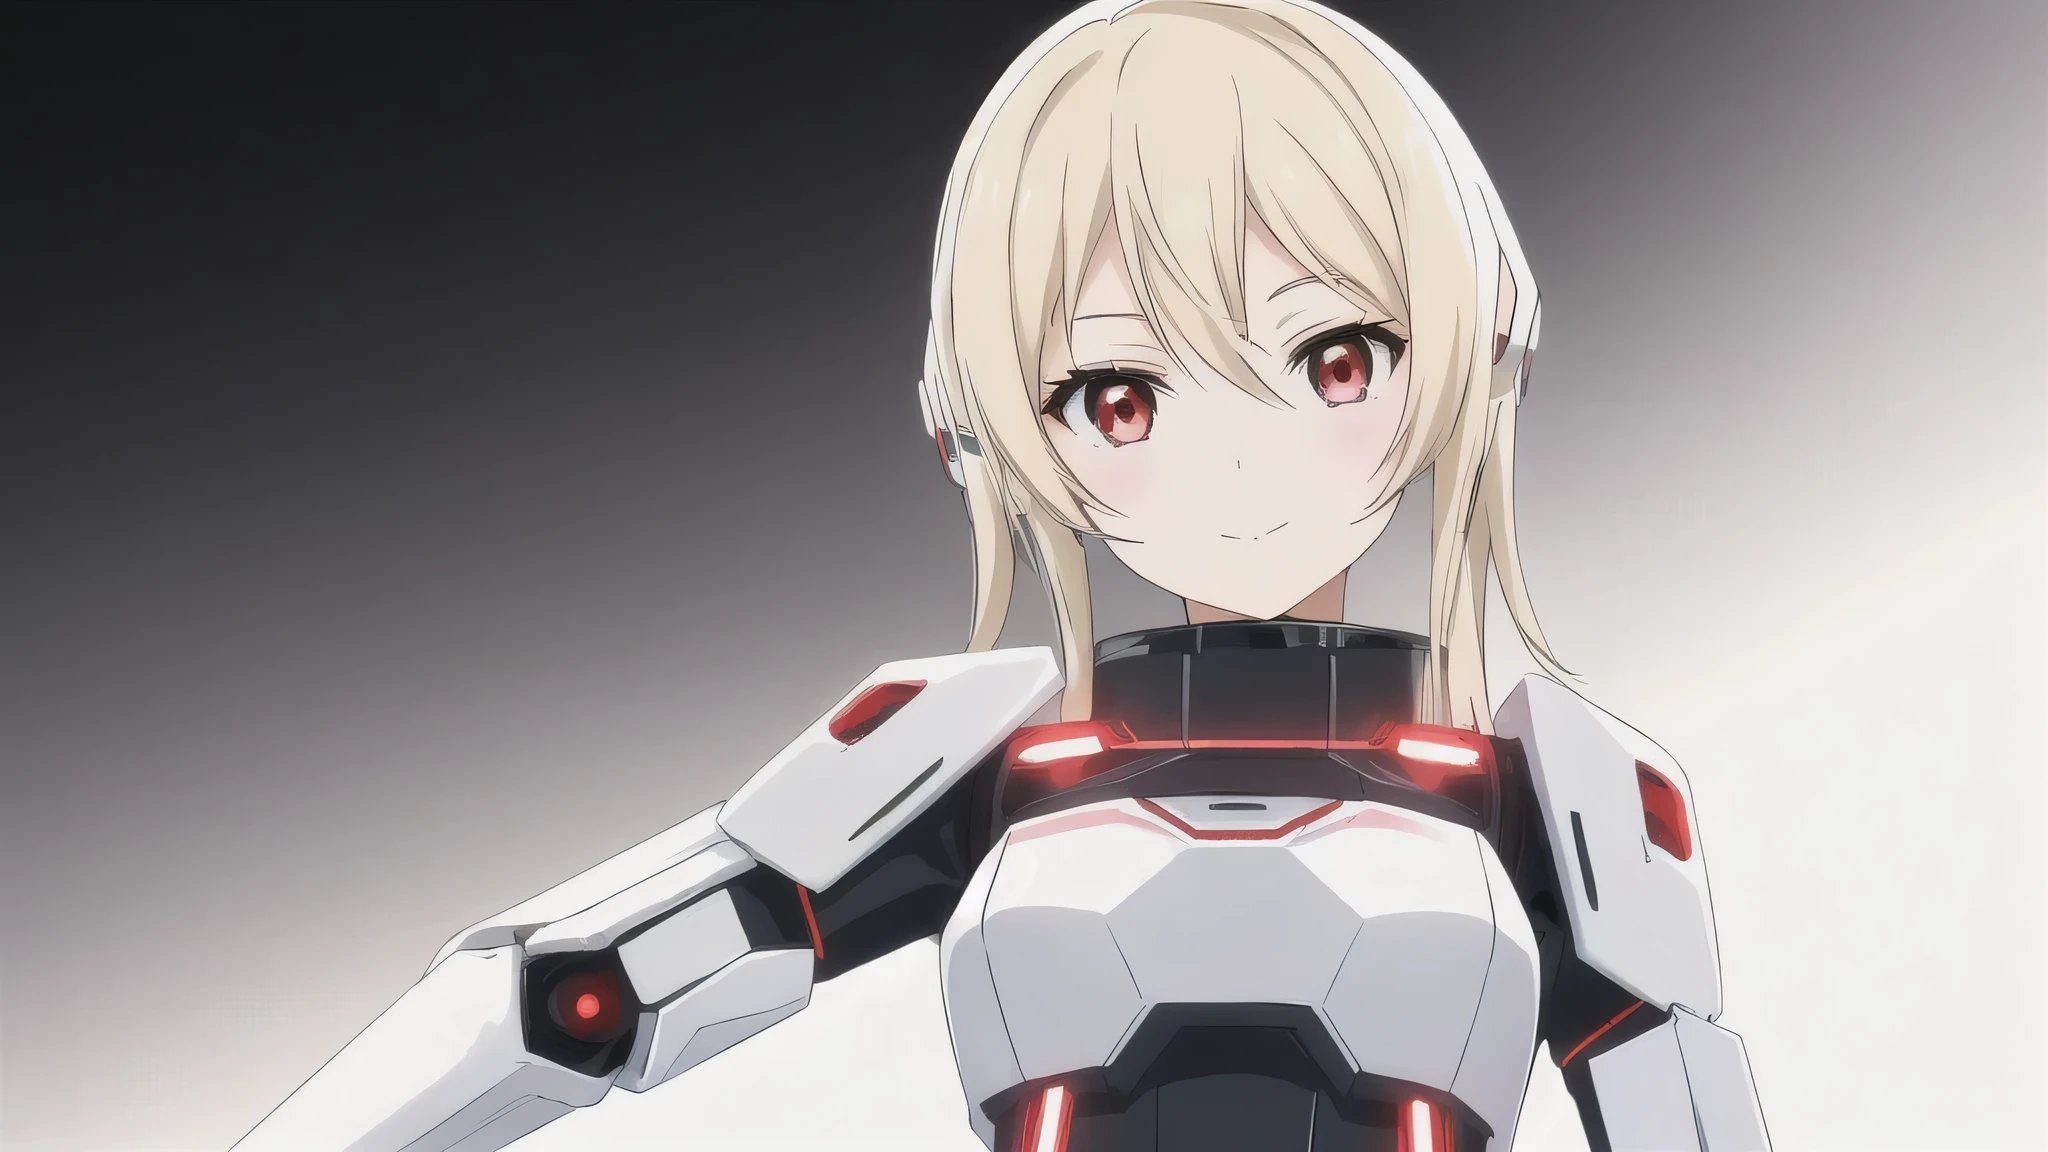 anime 女孩 with blonde hair and red eyes in a white and black suit, cute cyborg 女孩, 完全由機器人控制!! 女孩, 女孩 in mecha cyber armor, 動漫機器人!! anime 女孩, 安卓女主角, portrait anime space cadet 女孩, 動漫機器人, anime 女孩 of the future, perfect android 女孩, cyberpunk anime 女孩 mech, 美麗的女性機器人!, perfect 動漫機器人 woman